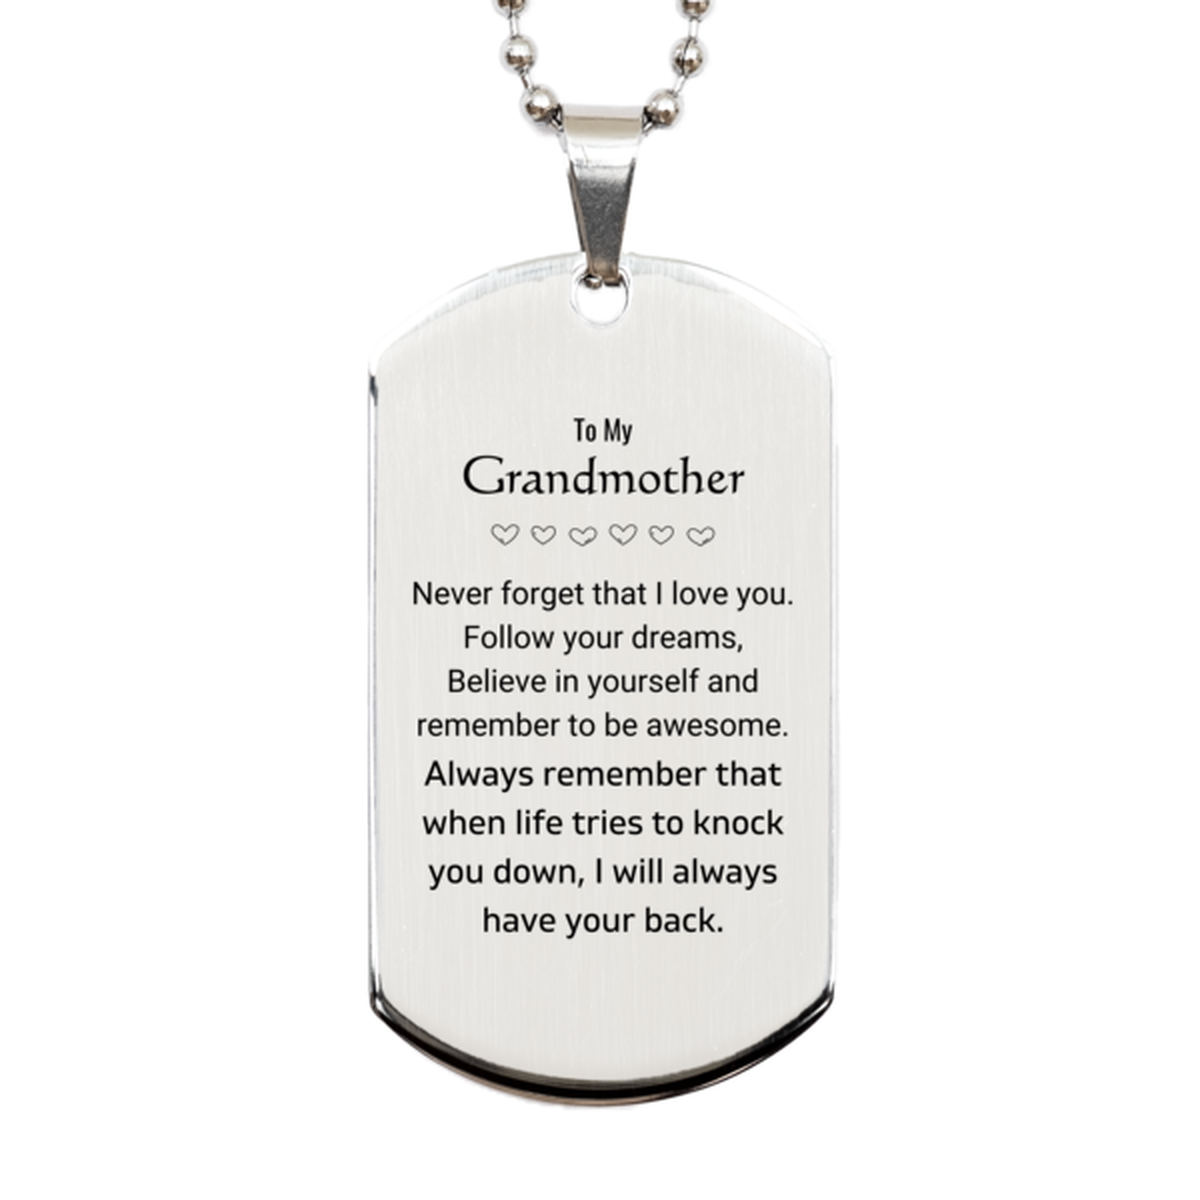 Inspirational Gifts for Grandmother, Follow your dreams, Believe in yourself, Grandmother Silver Dog Tag, Birthday Christmas Unique Gifts For Grandmother